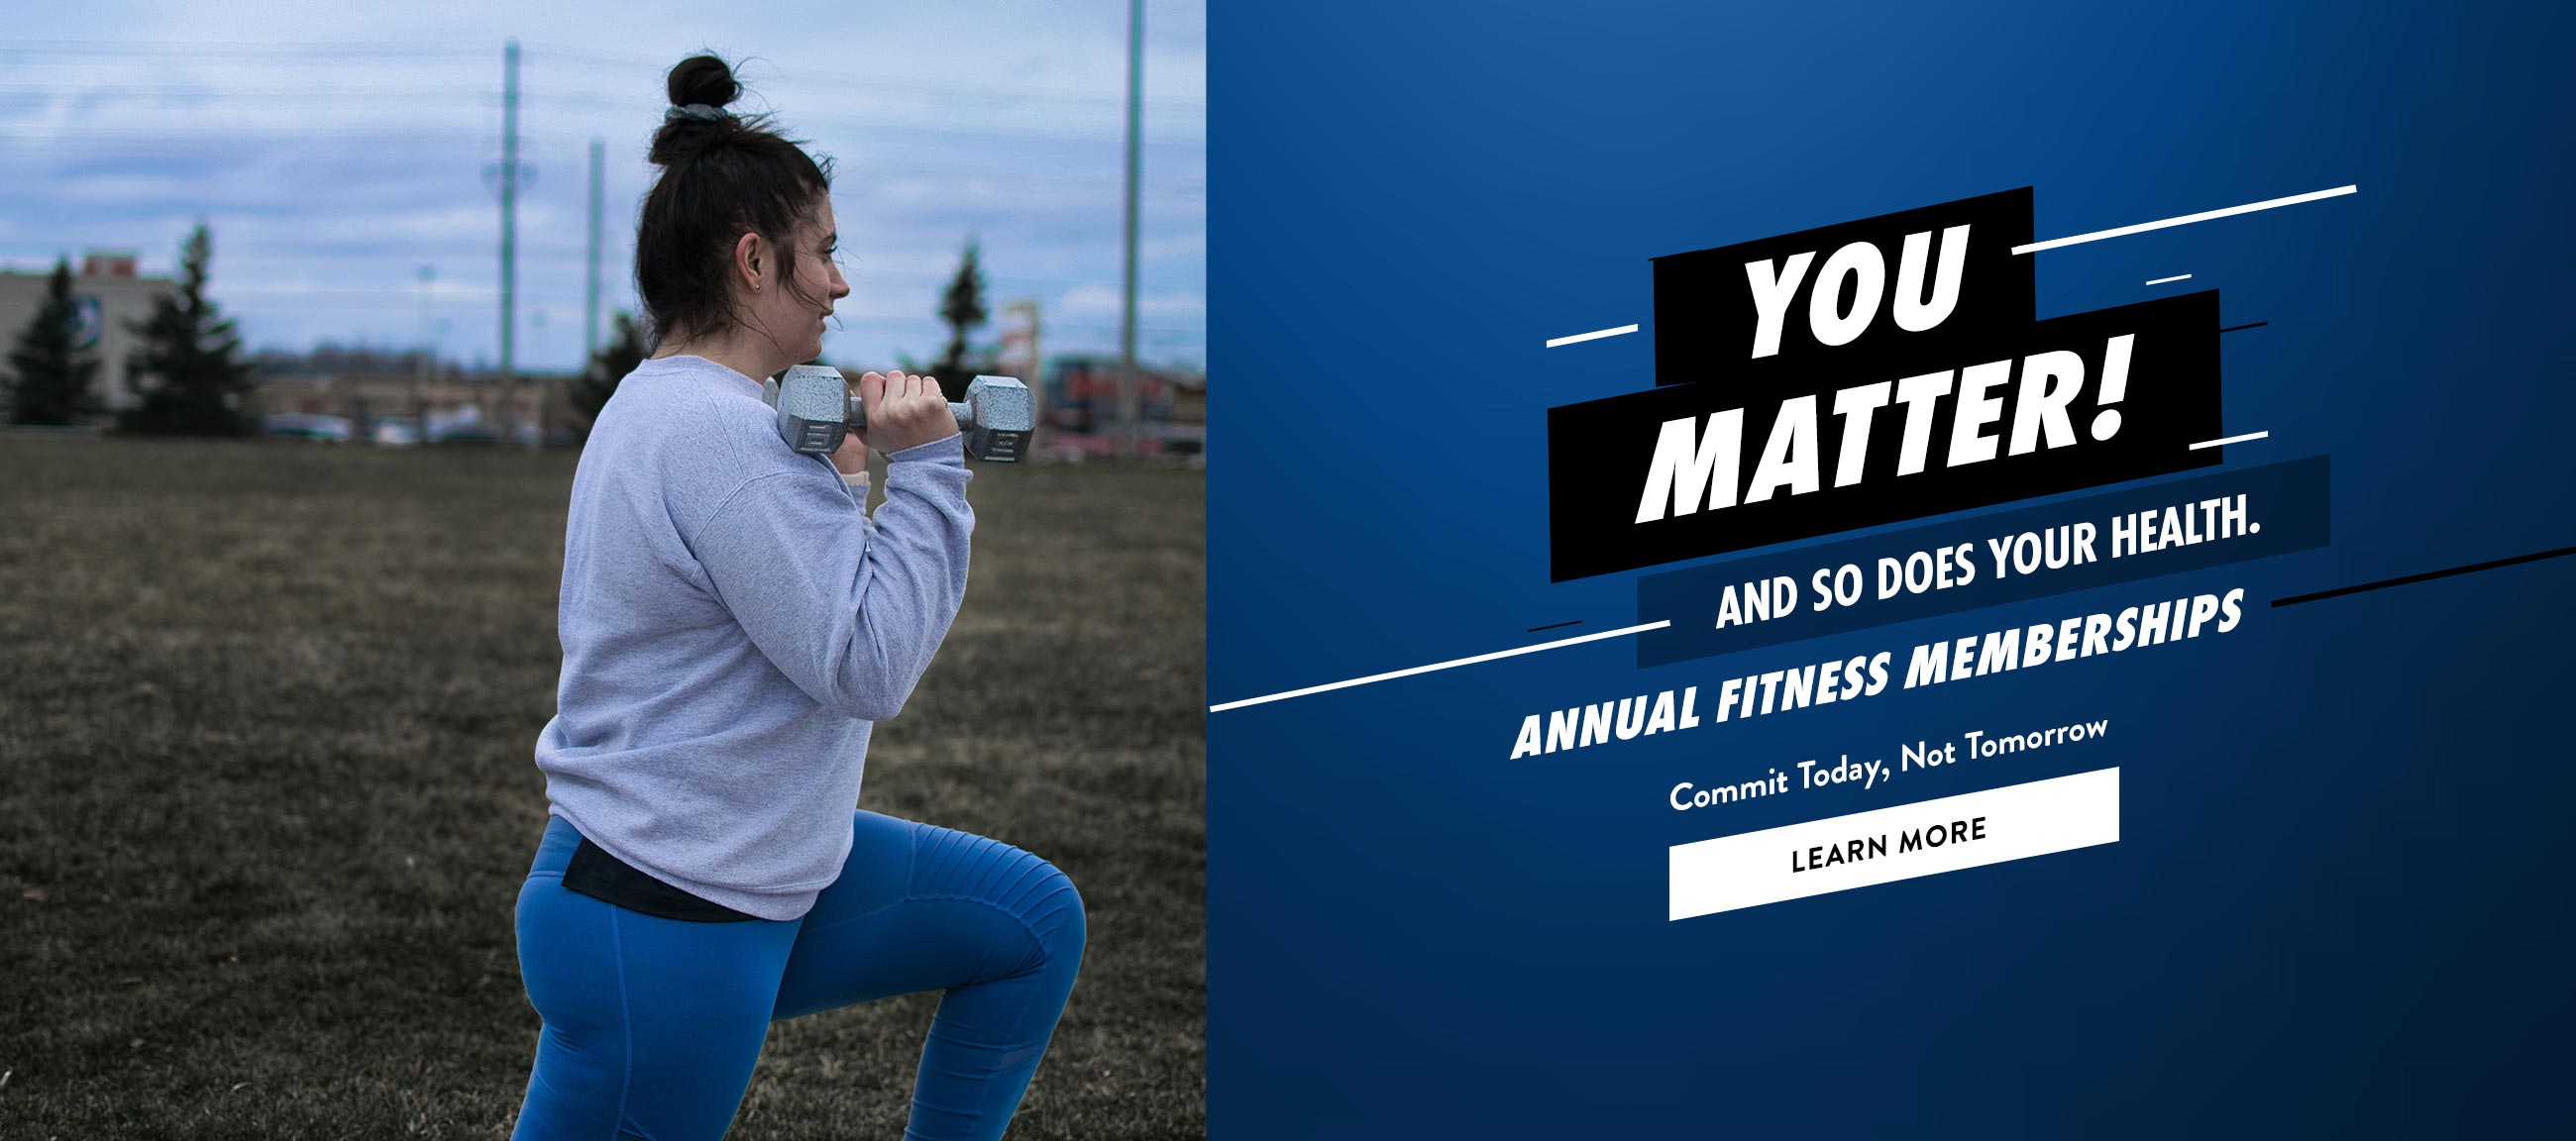 You Matter! And so does your health. Annual Fitness Memberships. commit today, not tomorrow